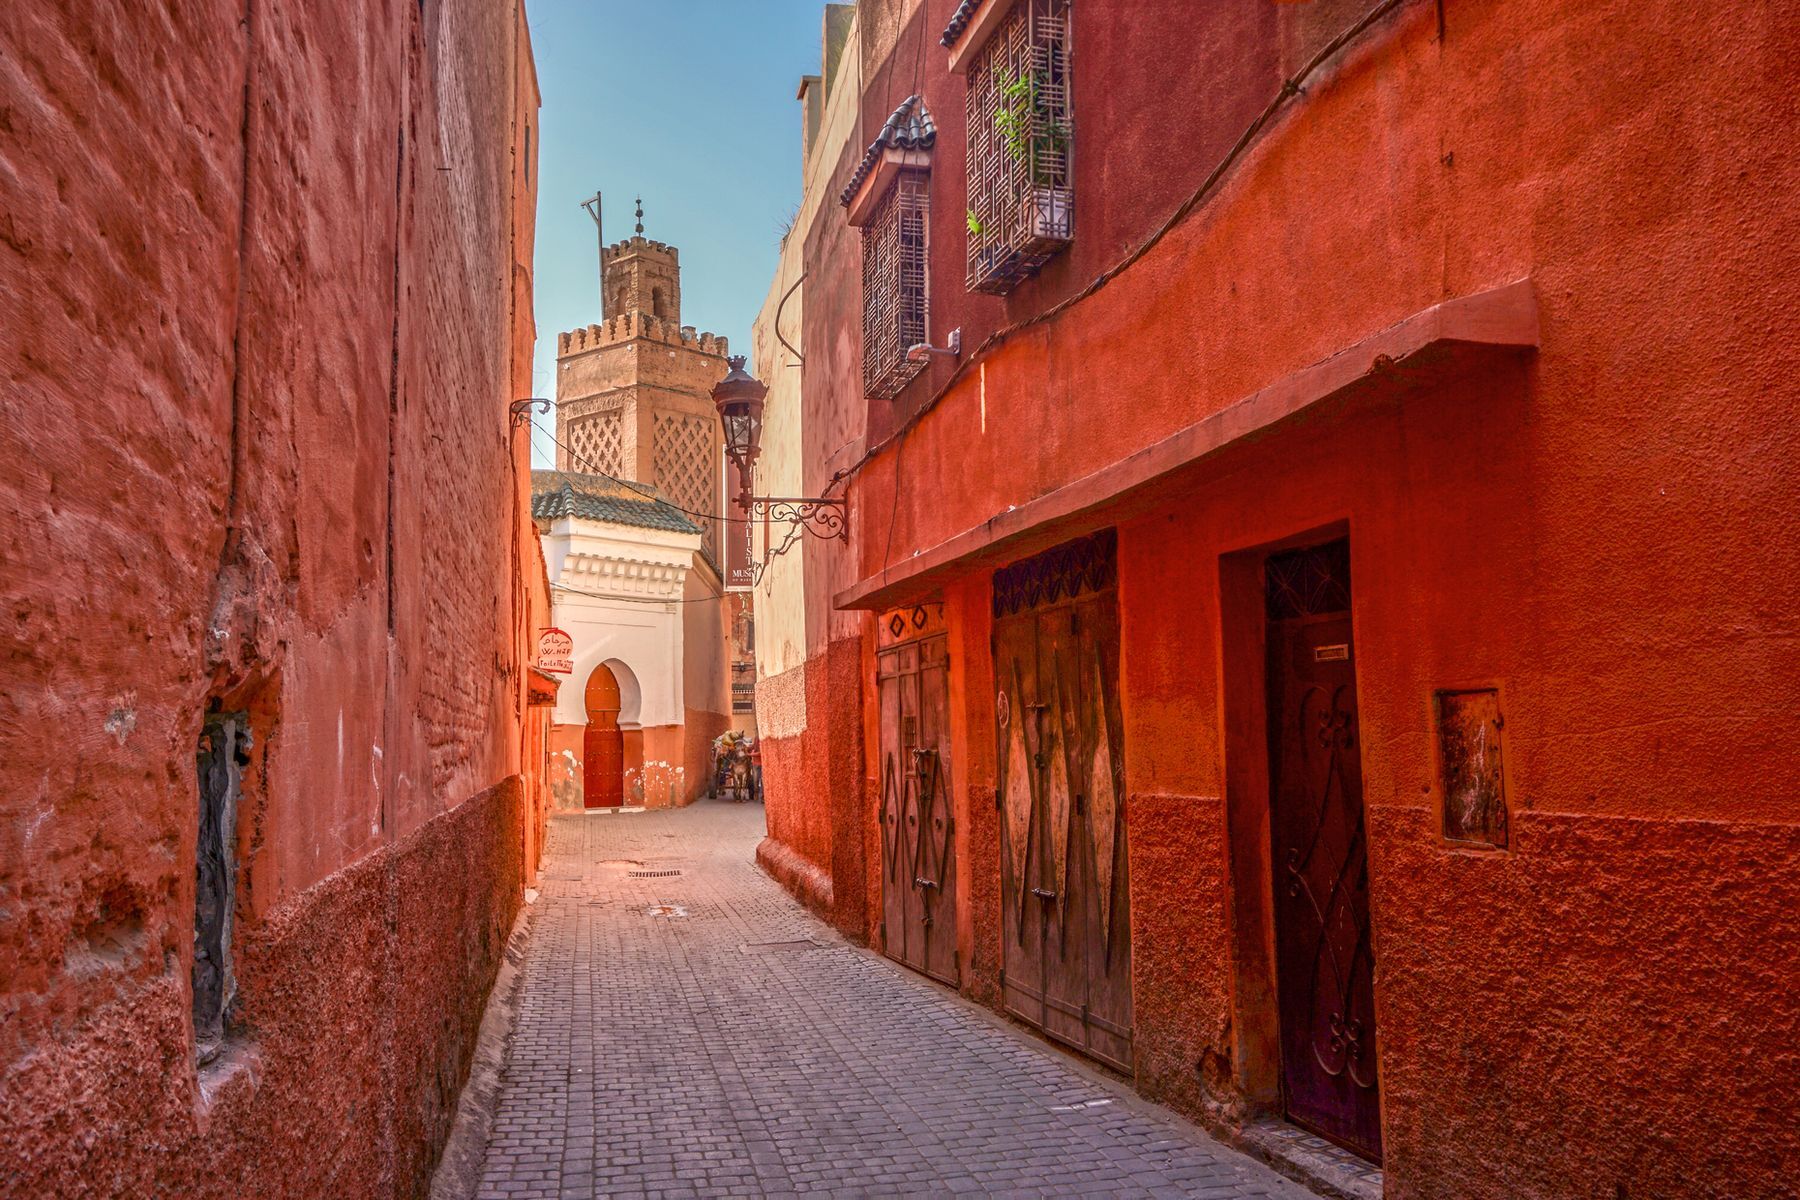 <p>Marrakech is known as the <a href="https://www.marrakechsunset.com/blog/what-is-the-red-city/37/" rel="noreferrer noopener">“Red</a> <a href="https://www.marrakechsunset.com/blog/what-is-the-red-city/37/" rel="noreferrer noopener">City”</a> or “Ochre City” due to the colour of its packed-clay buildings. Lots of affordable lodging enables visitors to stay in the heart of Marrakech near numerous attractions. For only 70 dirhams (<a href="https://exchangerate.guru/mad/usd/70/" rel="noreferrer noopener">US$7</a>), you’ll have ready access to <a href="https://bahia-palace.com/" rel="noreferrer noopener">Bahia Palace</a>. Built in the late 19th century, it features Moroccan Islamic architecture and vibrant colours of indelible beauty. Lastly, <a href="https://moroccanjourneys.com/the-souks-of-marrakech/" rel="noreferrer noopener">Marrakech’s souks</a>, half covered, half open-air labyrinthine markets, house various kiosks filled with Moroccan marvels waiting to be haggled over with vendors. You’ll find an enormous variety of local spices, rugs, traditional tajines, and more.</p>